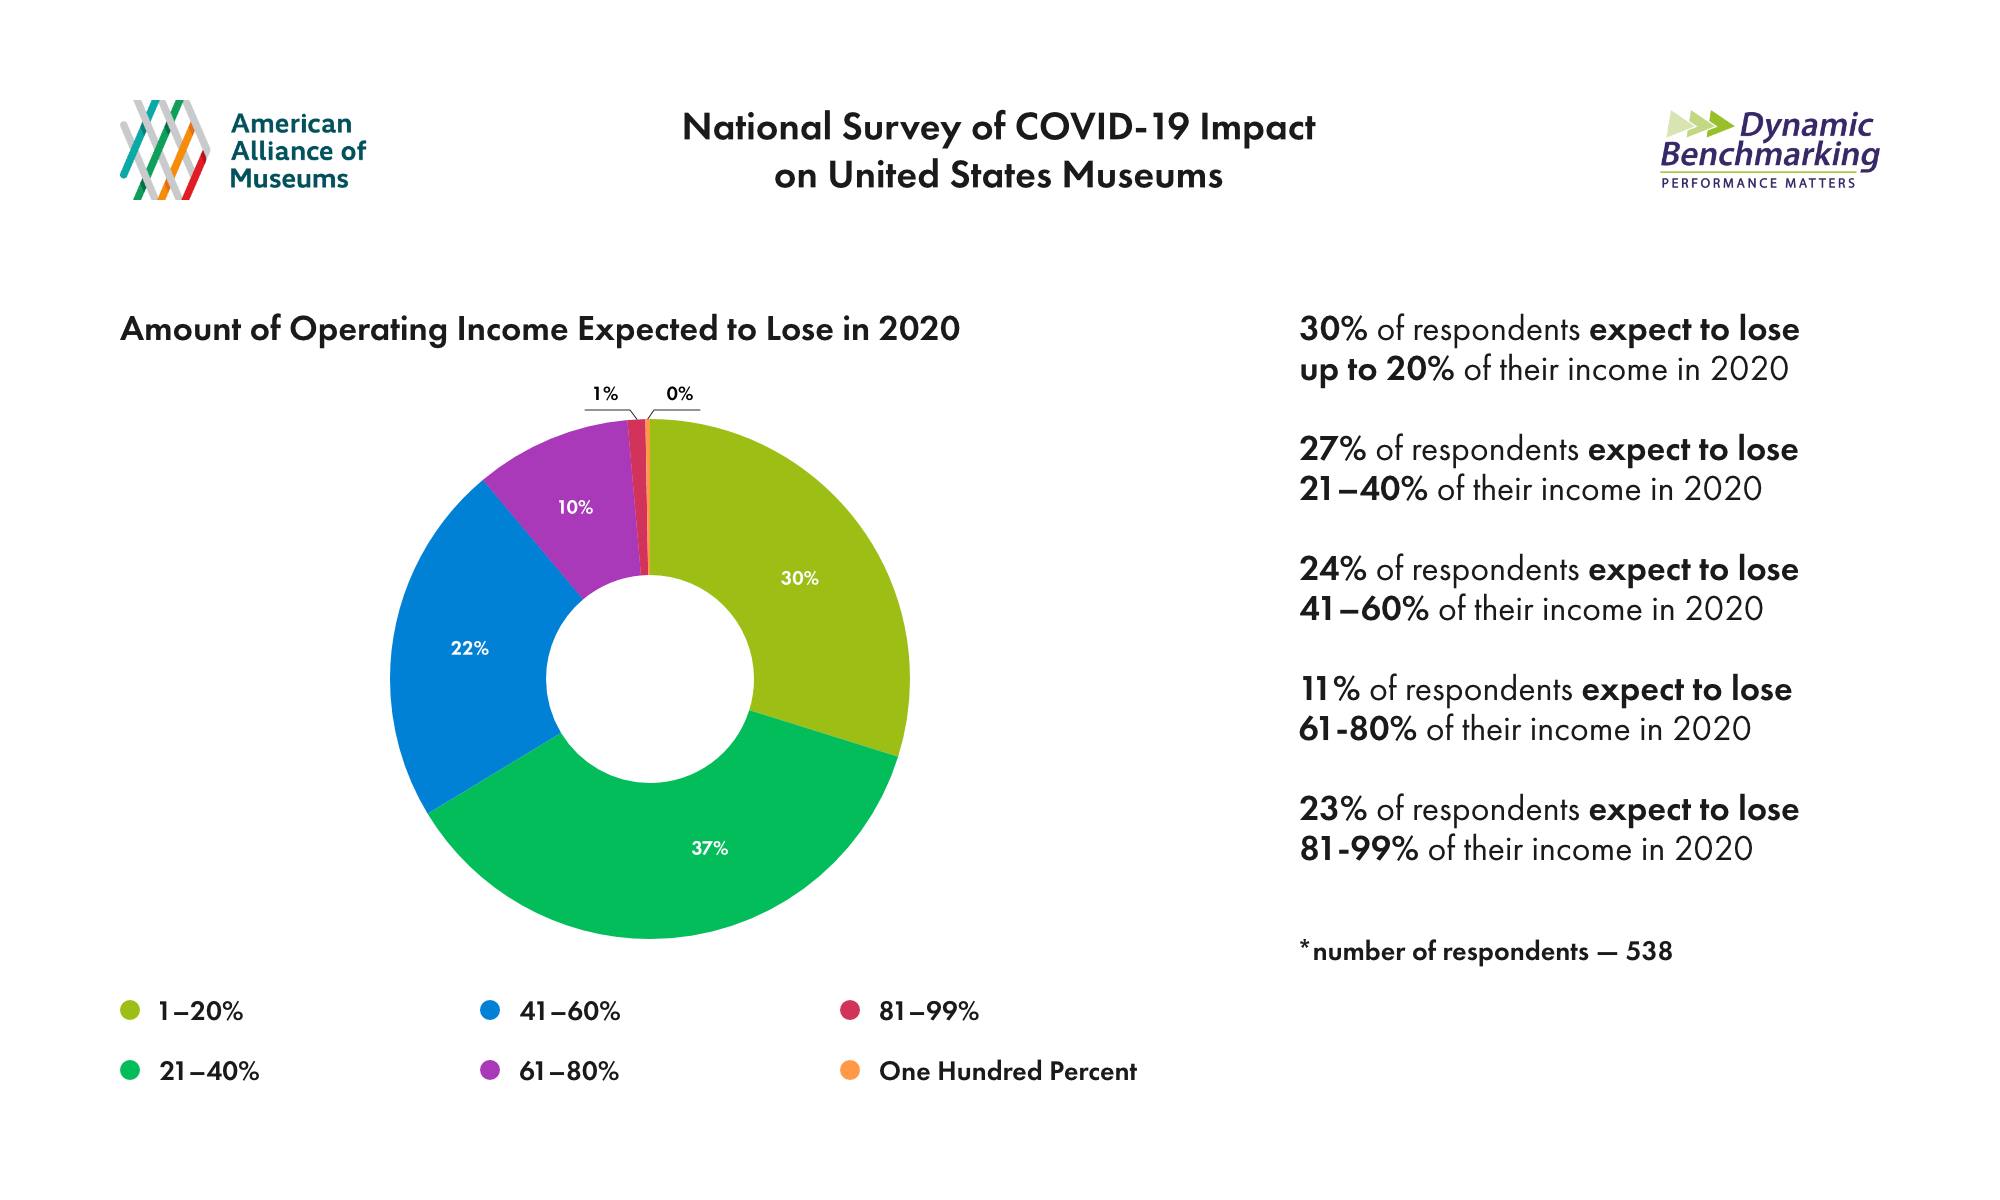 Amount of Operating Income to Lose per National Survey of COVID-19 Impact on United States Museums